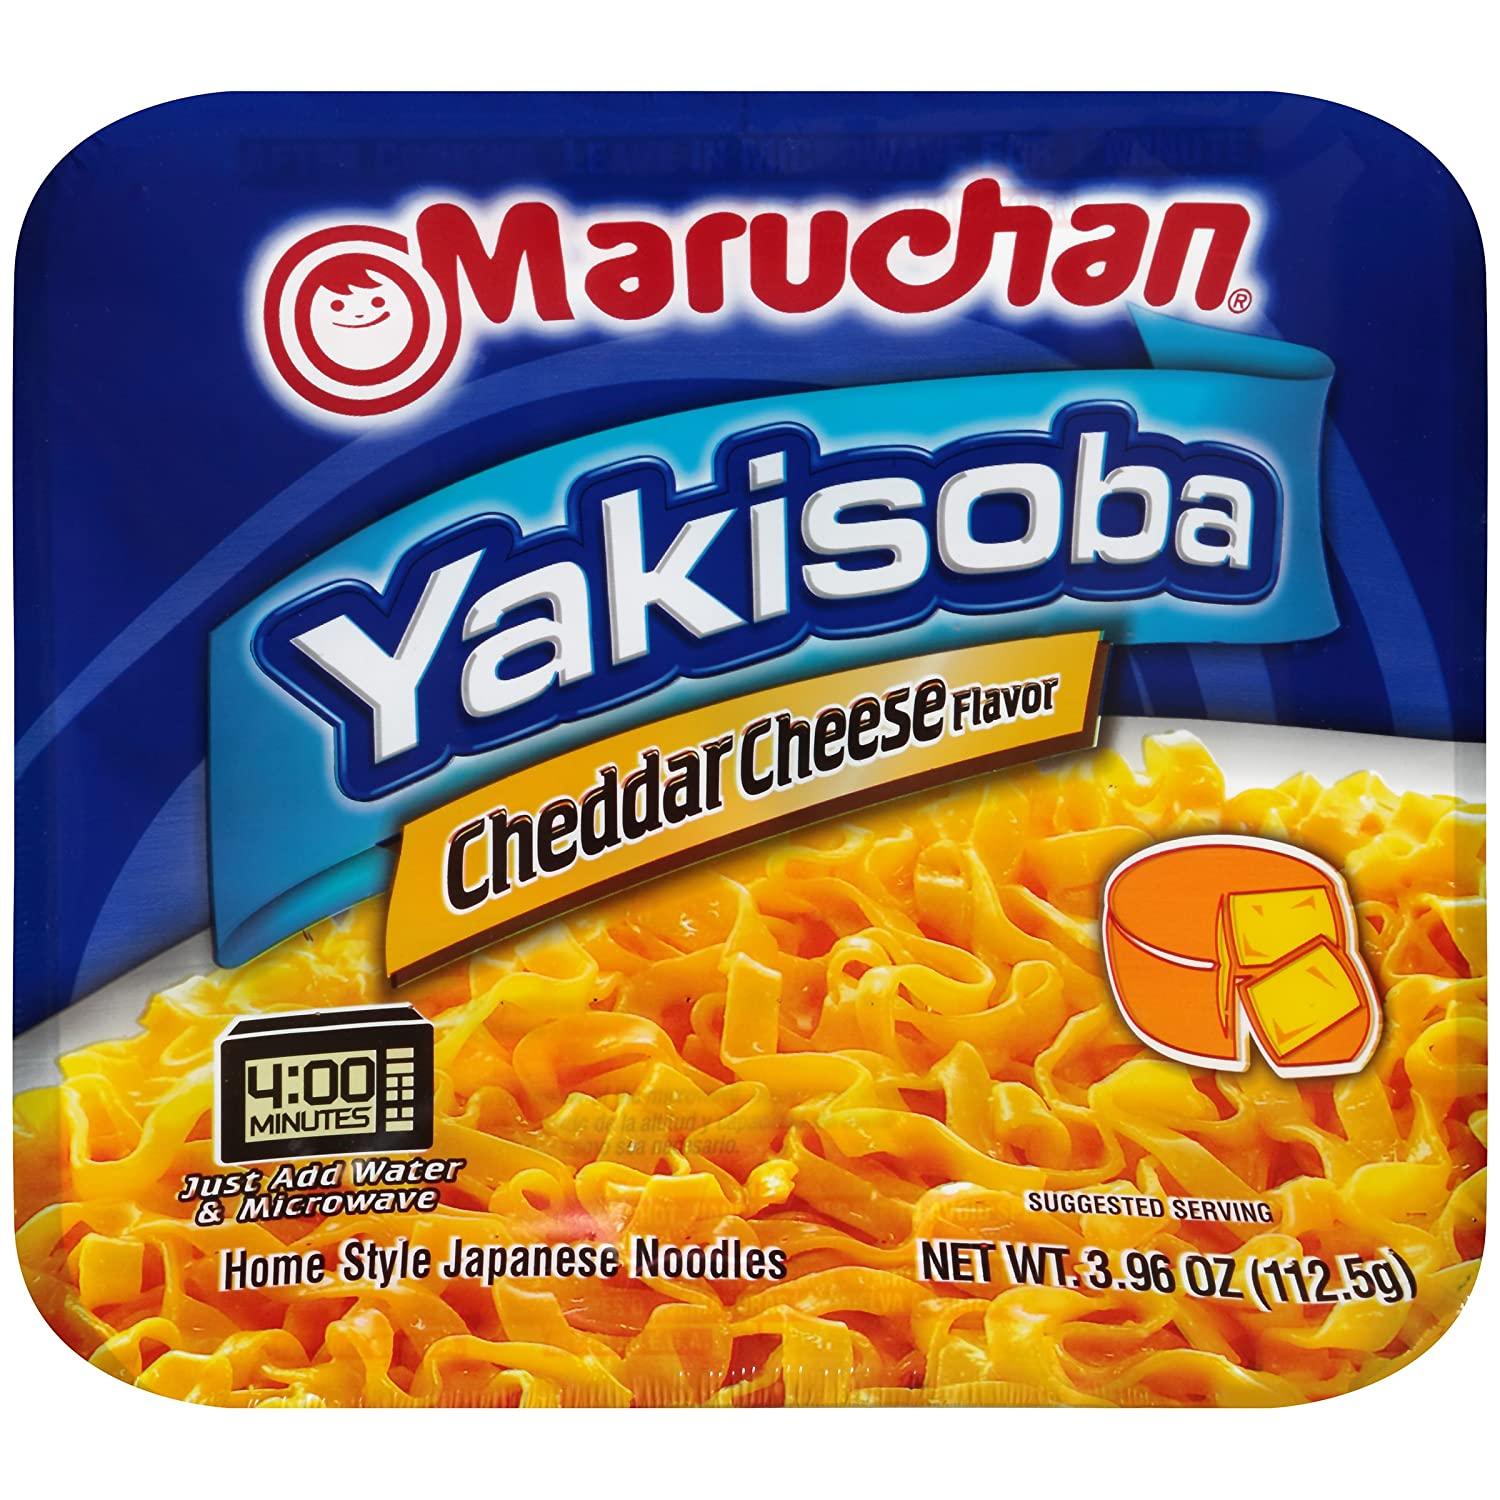 Maruchan Yakisoba Cheddar Cheese Flavor, 3.96 Oz, Pack of 8, (4178990766)  3.96 Ounce (Pack of 8) Chedder cheese